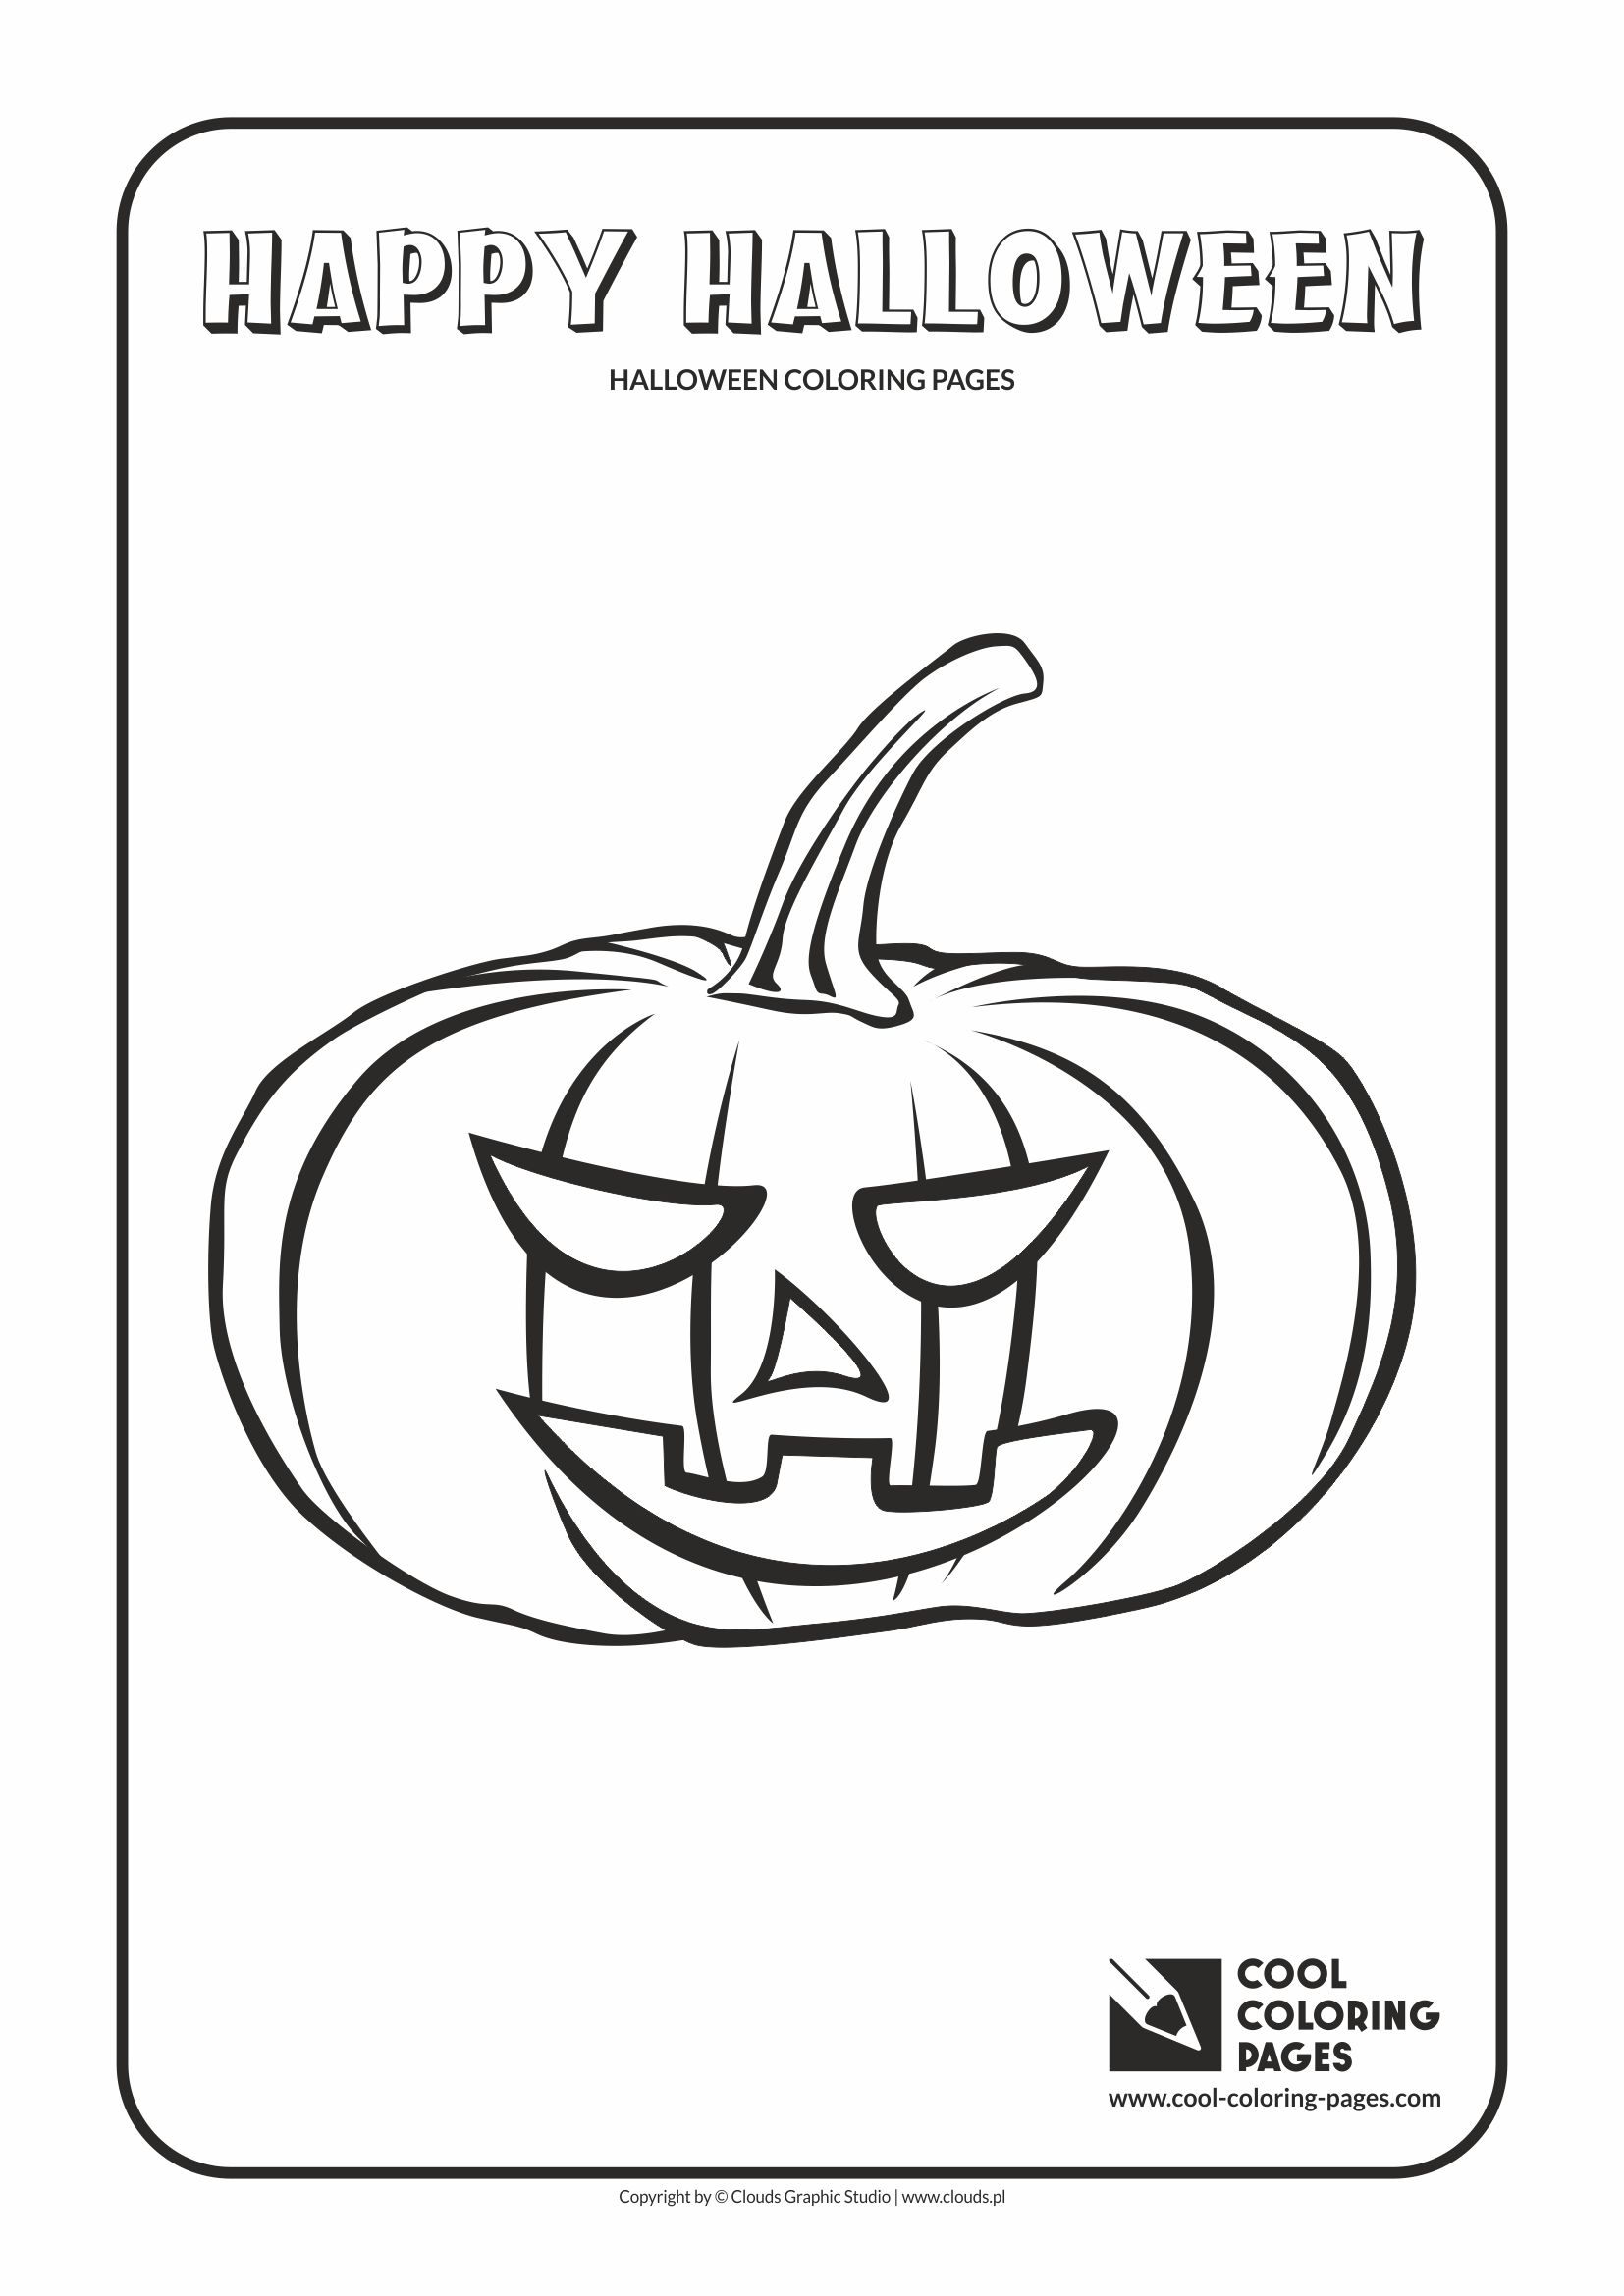 Cool Coloring Pages - Holidays / Halloween pumpkin no 1 / Coloring page with Halloween pumpkin no 1